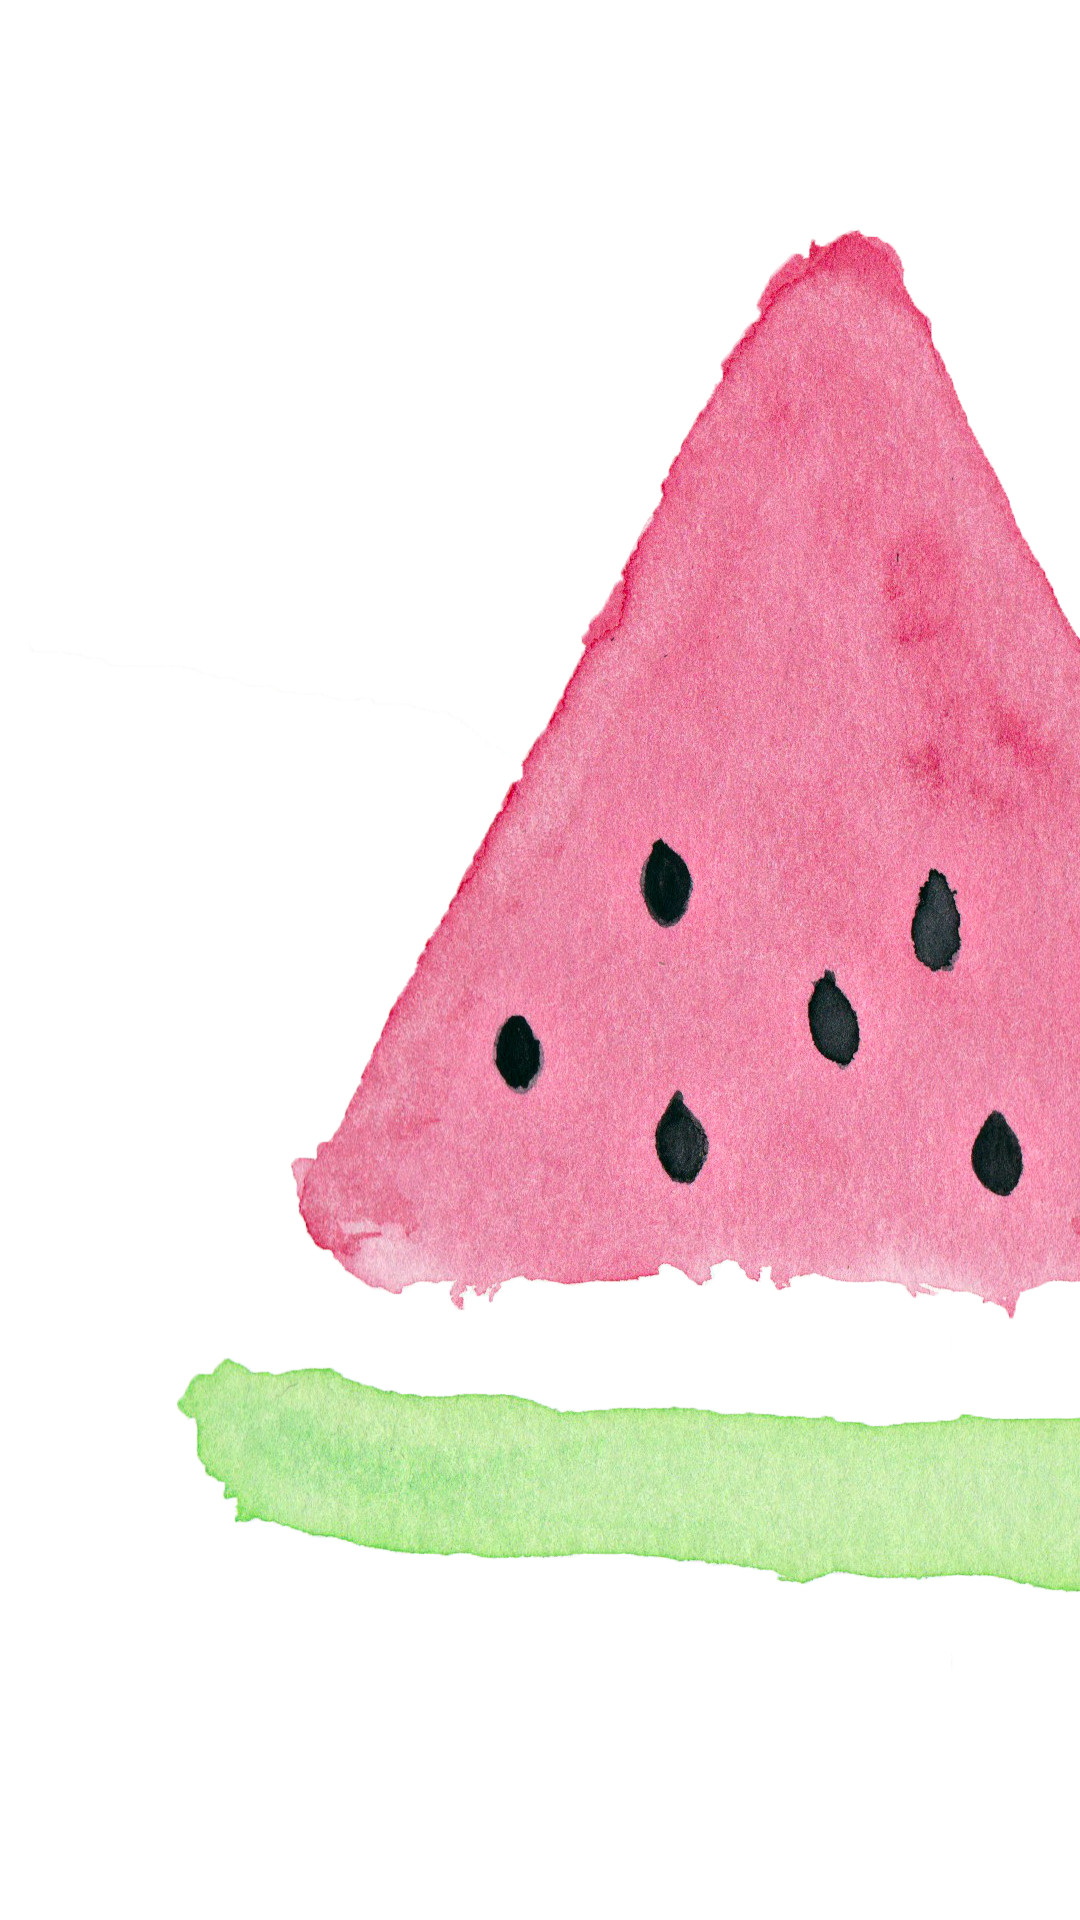 Watermelon Hand Painted Android Wallpaper …